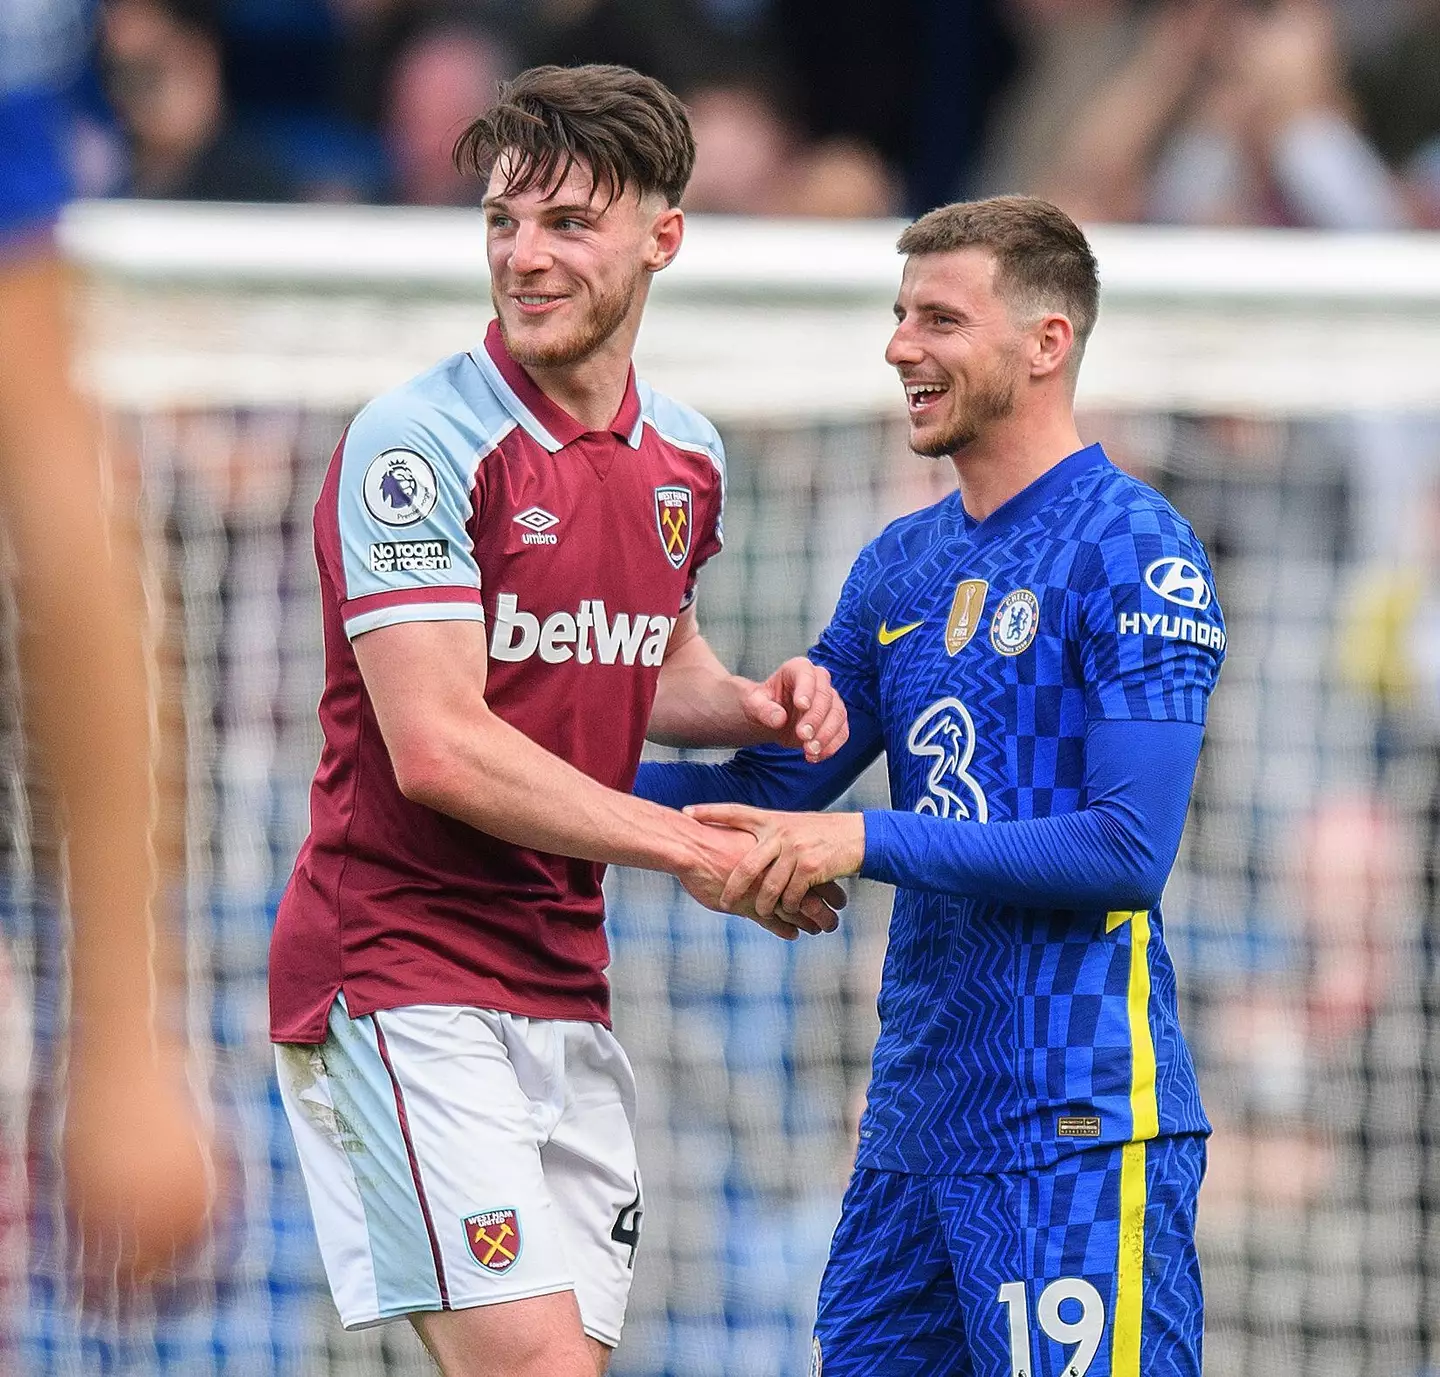 Mason Mount and Declan Rice during the Premier League match at Stamford Bridge. (Alamy)